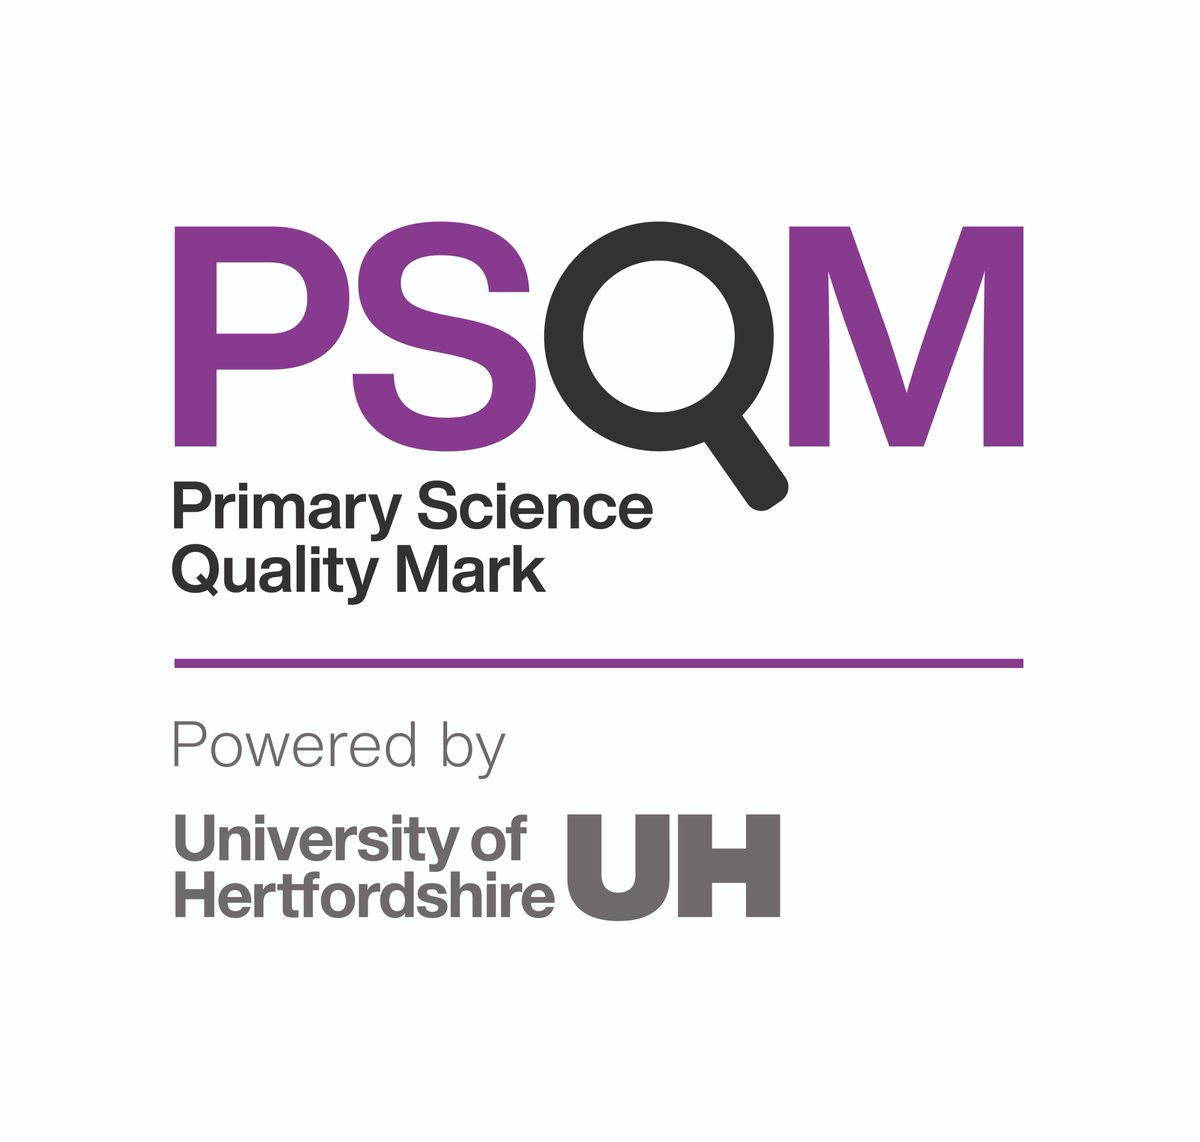 As we enter into a new phase, we're thrilled to share our fresh new look! Anticipate more exciting updates about the professional development programme in the months ahead. Watch this space! 🚀go.herts.ac.uk/psqm #PSQM #ExcitingTimesAhead #PrimaryScience @UniofHerts